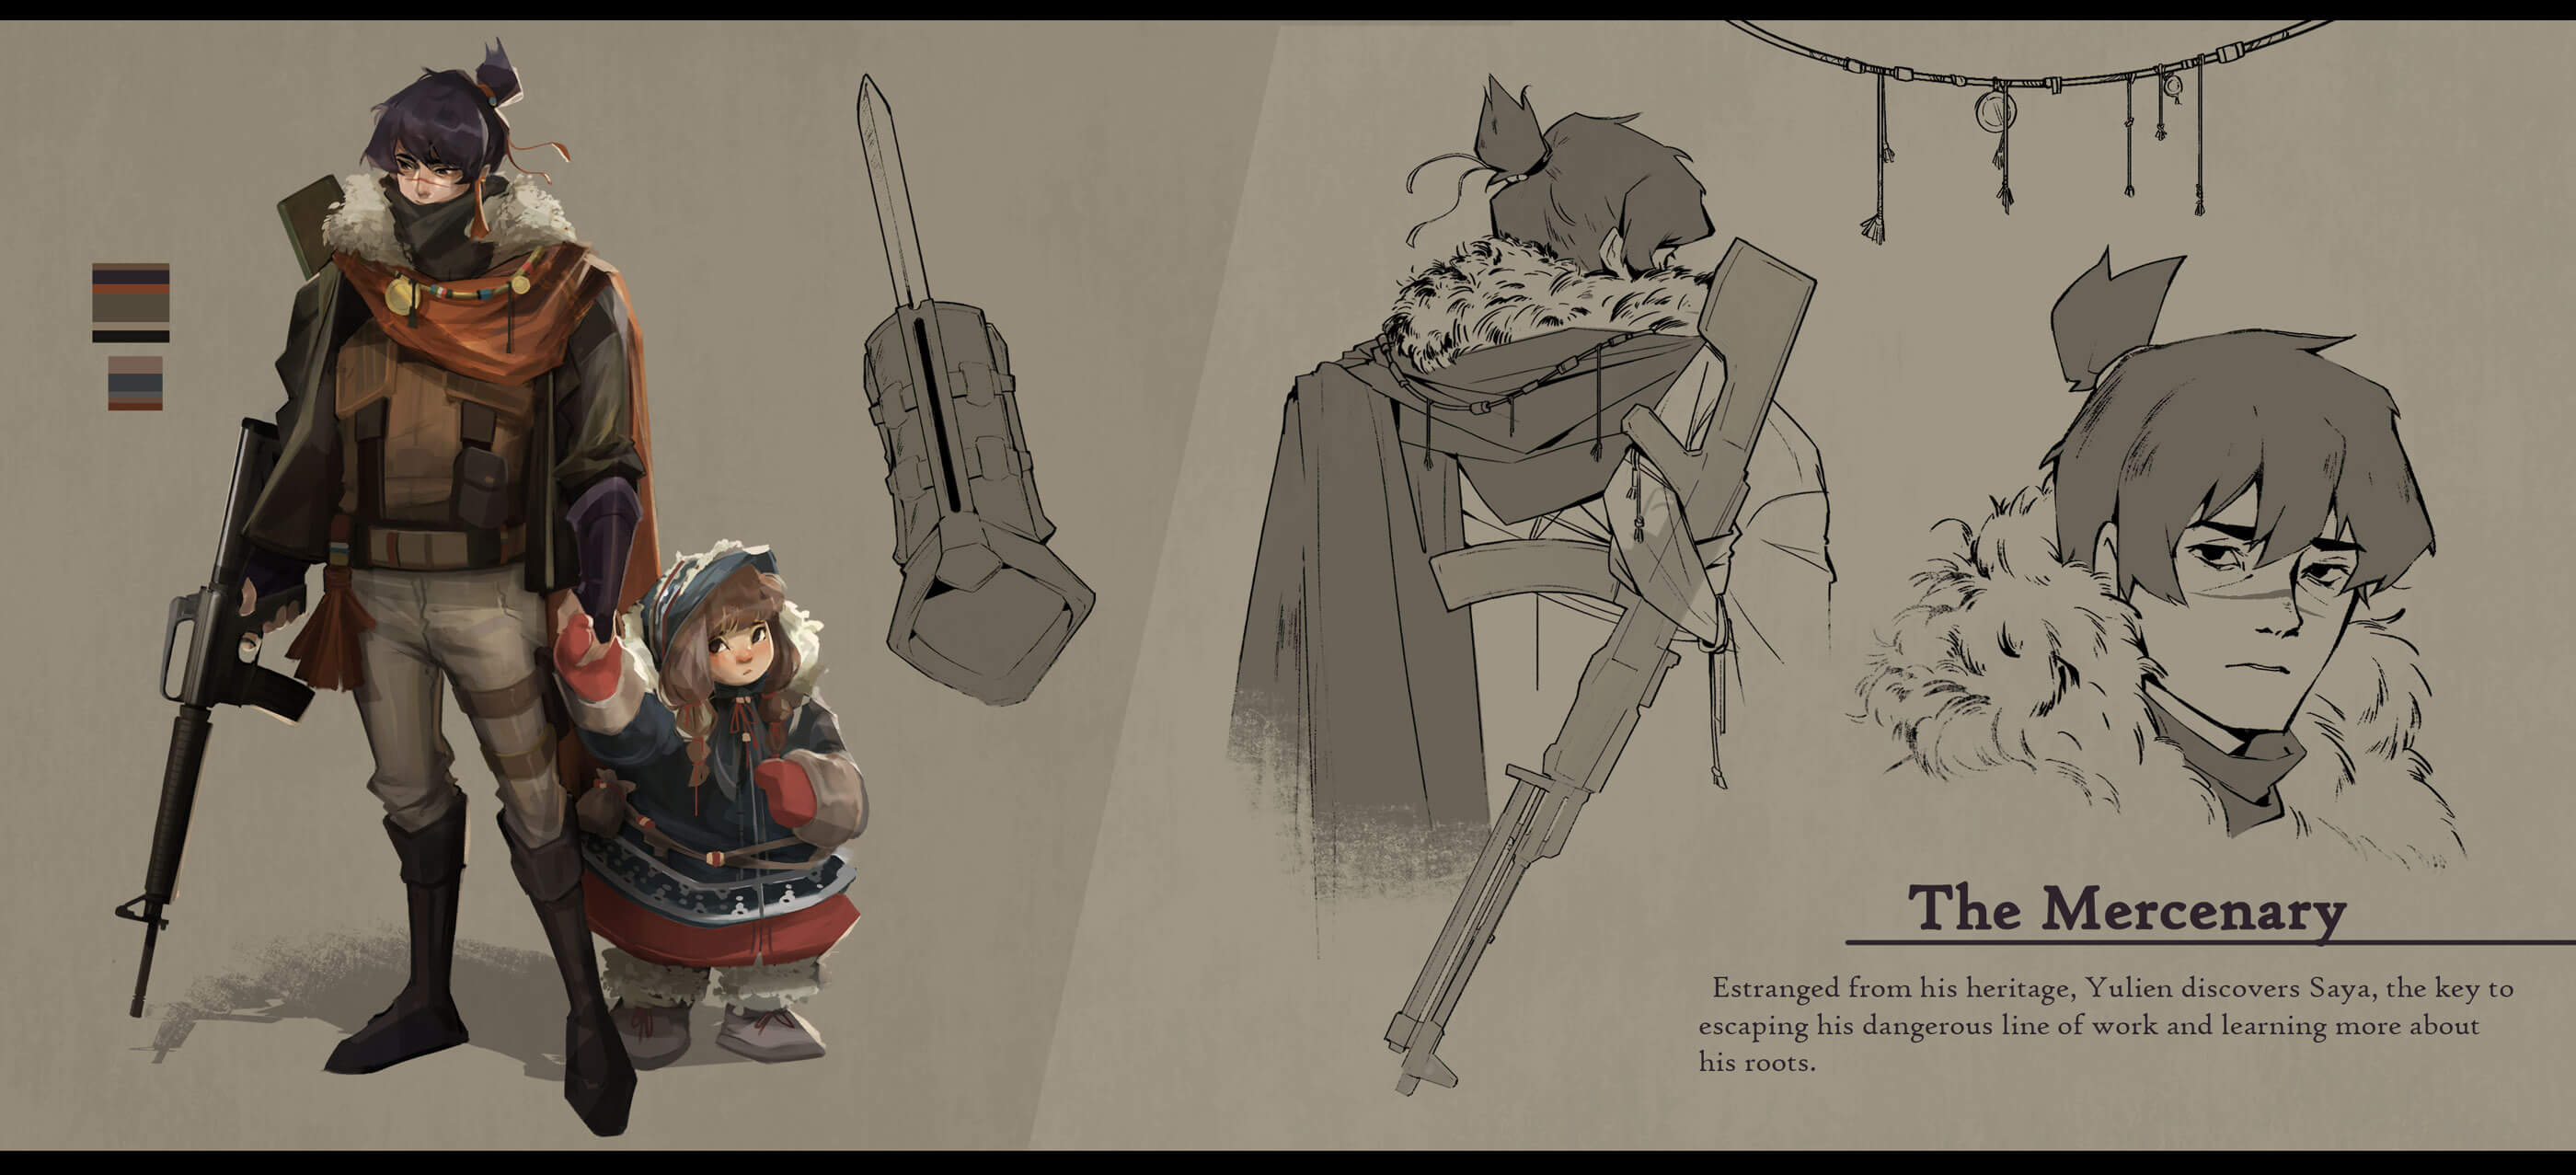 Character concept of a man with weapons protecting a little girl.